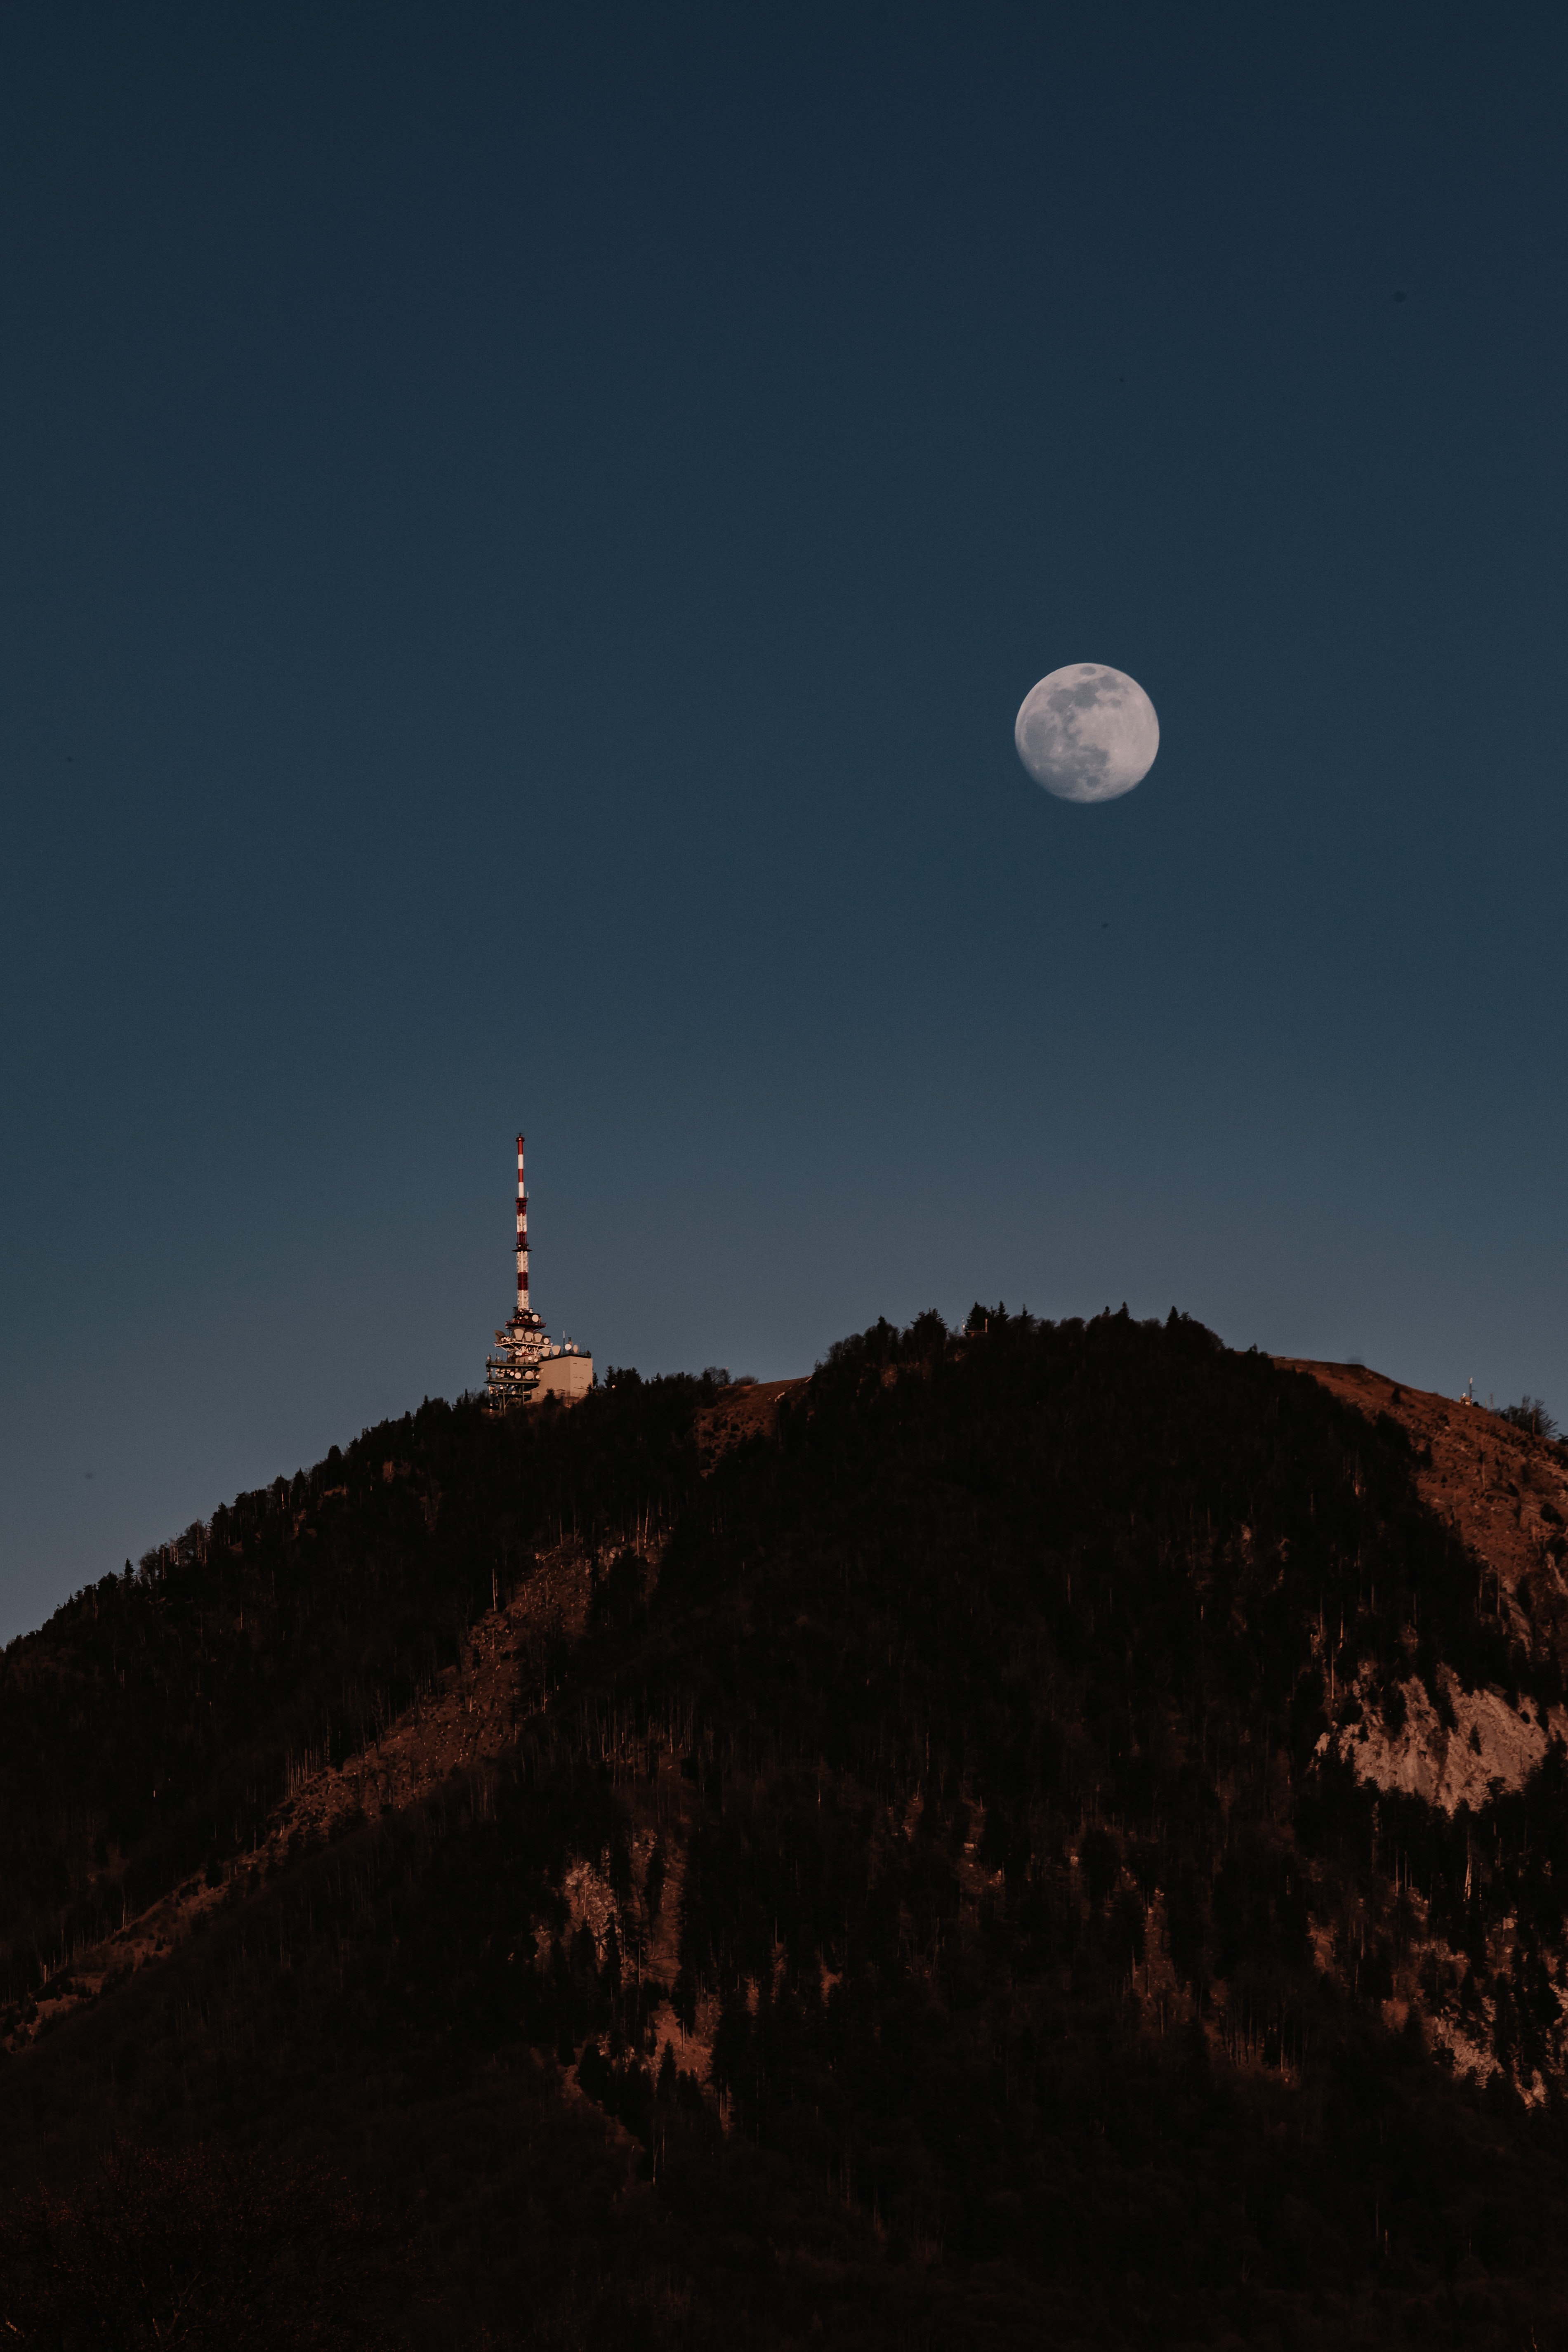 Widescreen image nature, tower, moon, trees